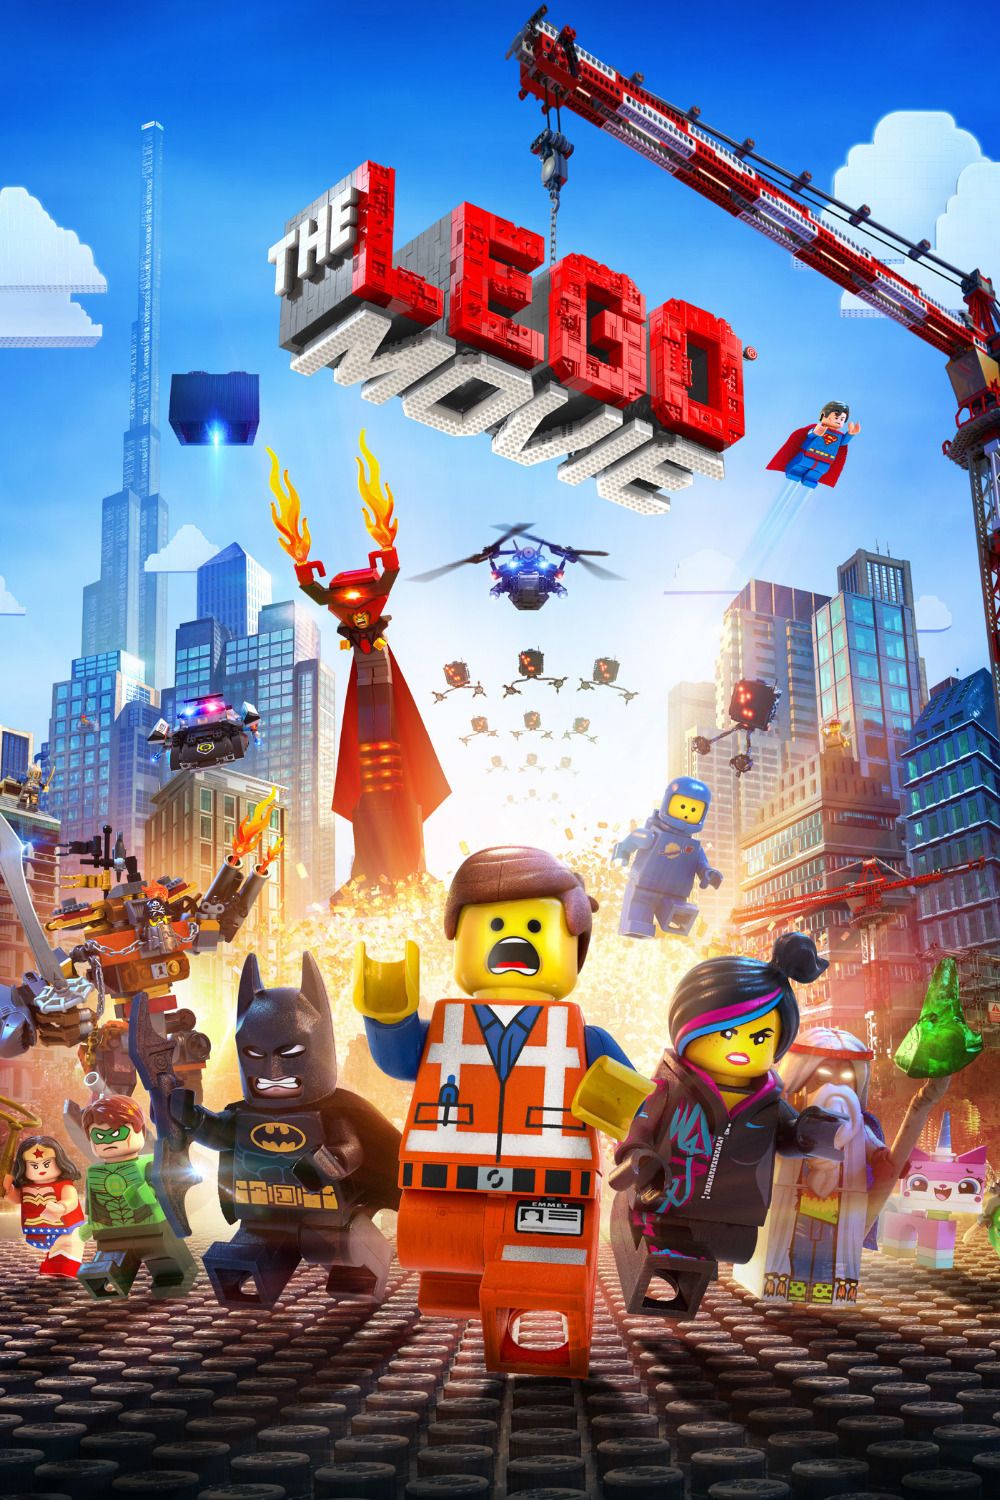  All Of The Lego-Verse Combined: The Lego Movie (DVD) + The Lego  Movie Part 2 (DVD) + The Lego Batman Movie + The Lego Ninjago Movie (4-Film  Ultimate Builders Collection) Region